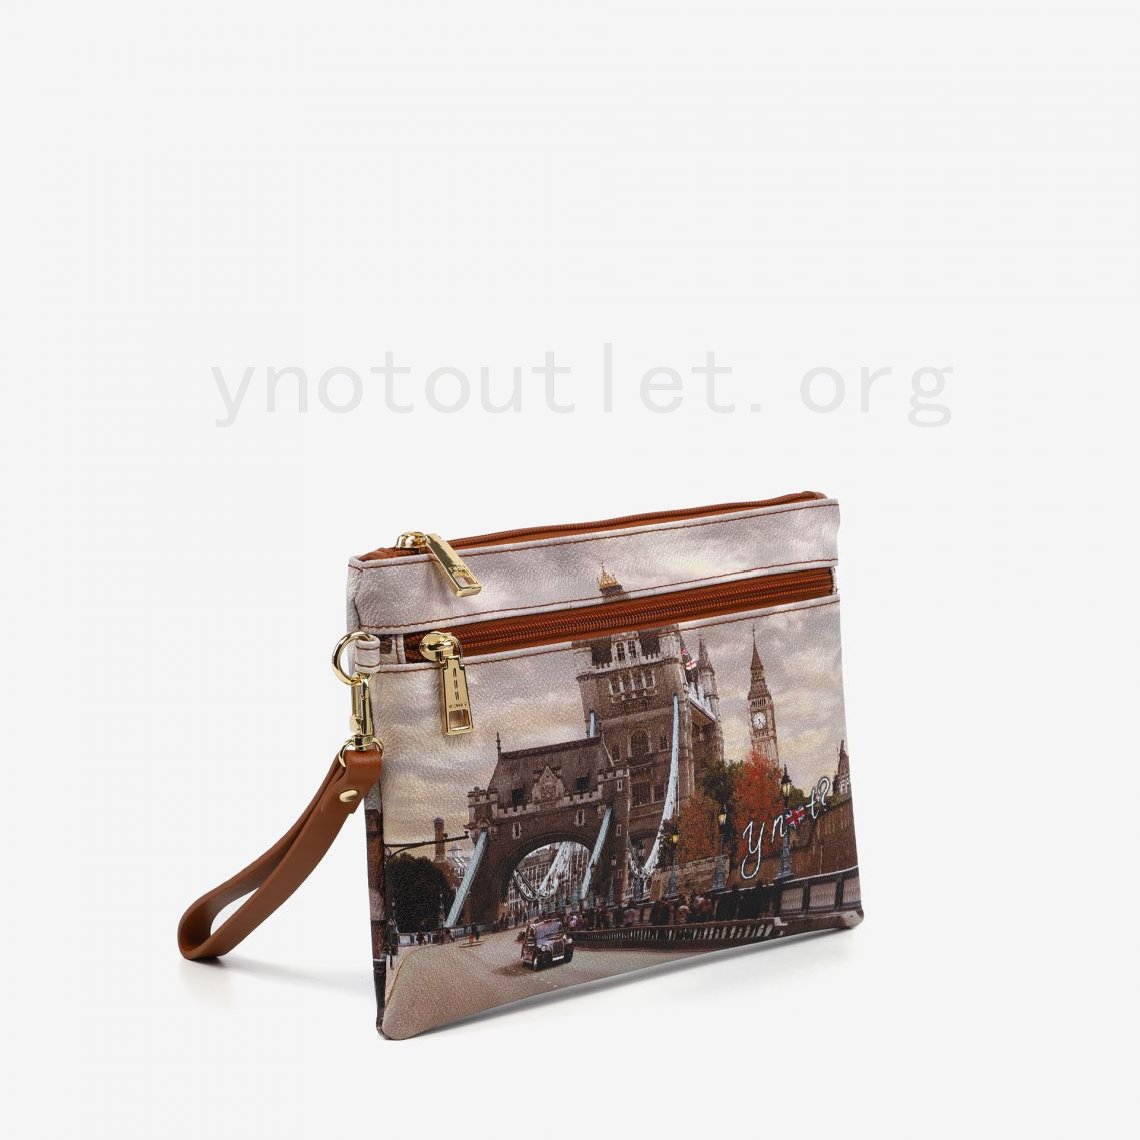 y not outlet Pocket With Handle Medium London Taxi Negozio Ufficiale